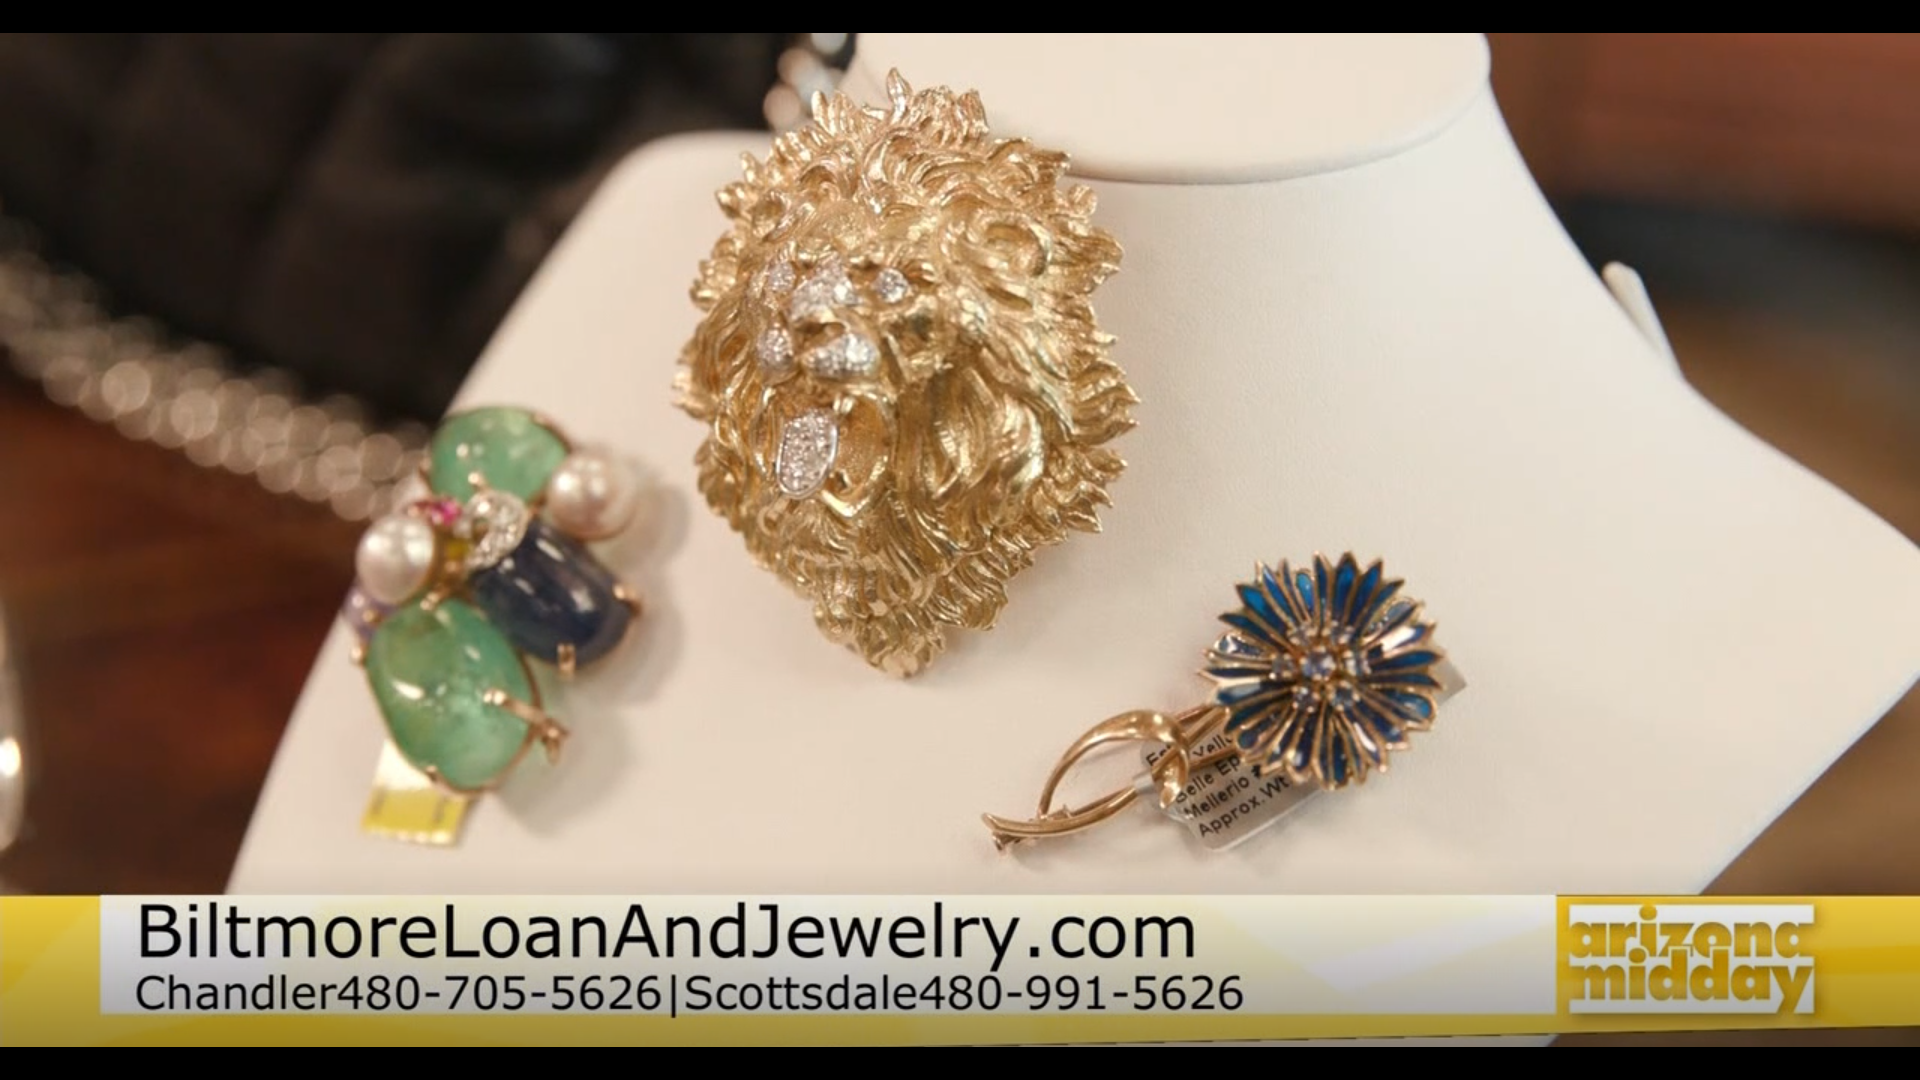 David Goldstein shows us how you can find everything from antique jewelry to brand name purses at Biltmore Loan and Jewelry .